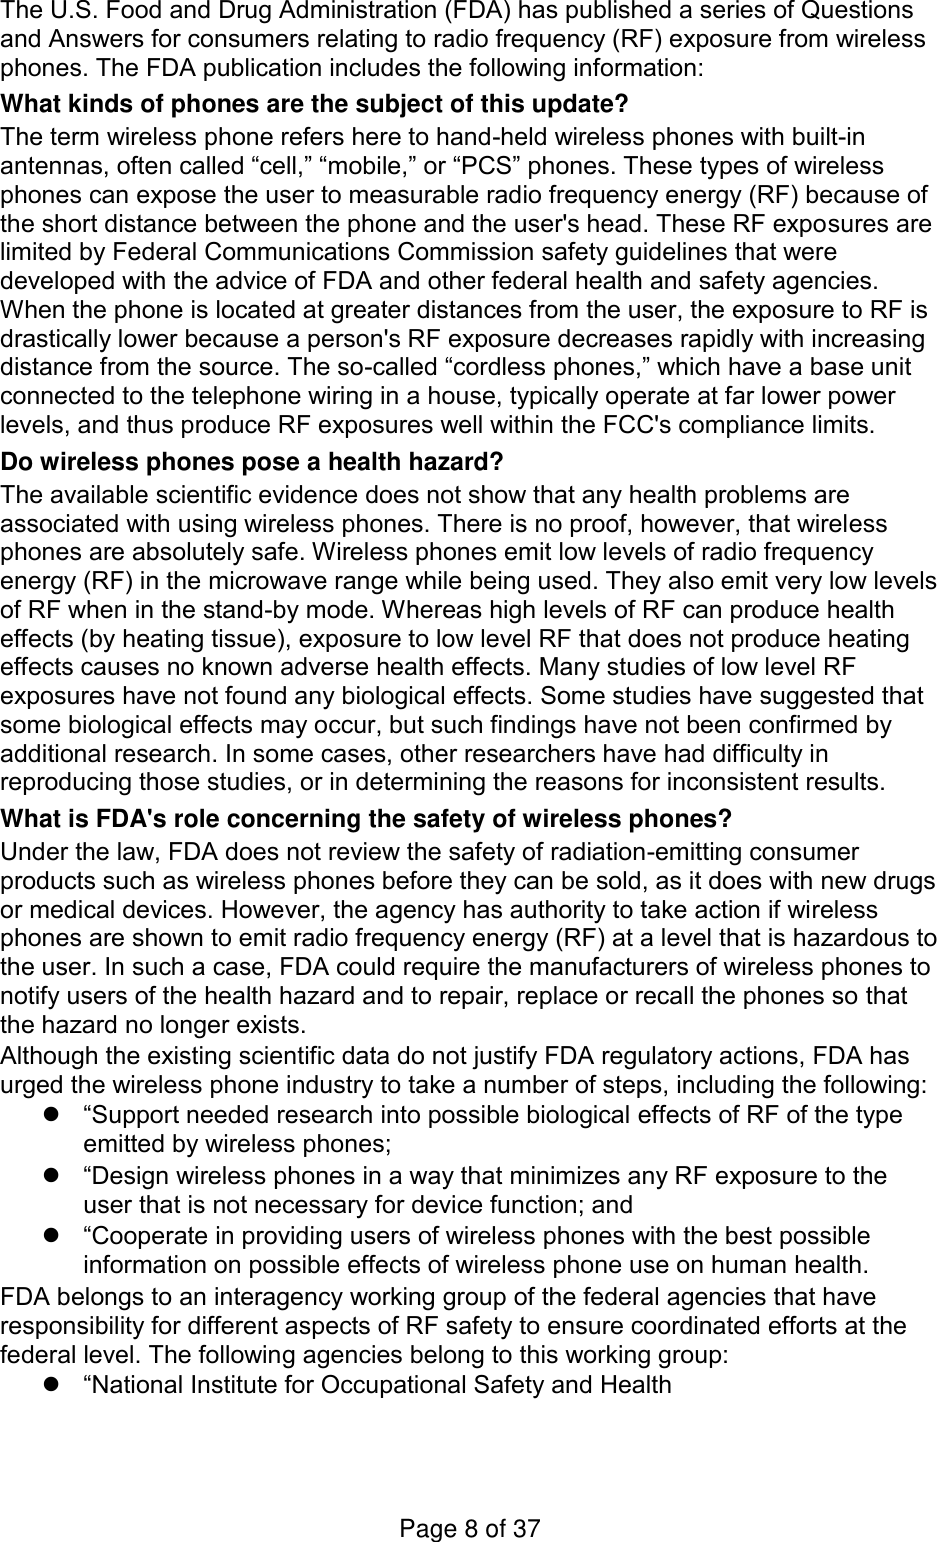 The U.S. Food and Drug Administration (FDA) has published a series of Questions and Answers for consumers relating to radio frequency (RF) exposure from wireless phones. The FDA publication includes the following information: What kinds of phones are the subject of this update? The term wireless phone refers here to hand-held wireless phones with built-in antennas, often called “cell,” “mobile,” or “PCS” phones. These types of wireless phones can expose the user to measurable radio frequency energy (RF) because of the short distance between the phone and the user&apos;s head. These RF exposures are limited by Federal Communications Commission safety guidelines that were developed with the advice of FDA and other federal health and safety agencies. When the phone is located at greater distances from the user, the exposure to RF is drastically lower because a person&apos;s RF exposure decreases rapidly with increasing distance from the source. The so-called “cordless phones,” which have a base unit connected to the telephone wiring in a house, typically operate at far lower power levels, and thus produce RF exposures well within the FCC&apos;s compliance limits. Do wireless phones pose a health hazard? The available scientific evidence does not show that any health problems are associated with using wireless phones. There is no proof, however, that wireless phones are absolutely safe. Wireless phones emit low levels of radio frequency energy (RF) in the microwave range while being used. They also emit very low levels of RF when in the stand-by mode. Whereas high levels of RF can produce health effects (by heating tissue), exposure to low level RF that does not produce heating effects causes no known adverse health effects. Many studies of low level RF exposures have not found any biological effects. Some studies have suggested that some biological effects may occur, but such findings have not been confirmed by additional research. In some cases, other researchers have had difficulty in reproducing those studies, or in determining the reasons for inconsistent results. What is FDA&apos;s role concerning the safety of wireless phones? Under the law, FDA does not review the safety of radiation-emitting consumer products such as wireless phones before they can be sold, as it does with new drugs or medical devices. However, the agency has authority to take action if wireless phones are shown to emit radio frequency energy (RF) at a level that is hazardous to the user. In such a case, FDA could require the manufacturers of wireless phones to notify users of the health hazard and to repair, replace or recall the phones so that the hazard no longer exists. Although the existing scientific data do not justify FDA regulatory actions, FDA has urged the wireless phone industry to take a number of steps, including the following:  “Support needed research into possible biological effects of RF of the type emitted by wireless phones;  “Design wireless phones in a way that minimizes any RF exposure to the user that is not necessary for device function; and  “Cooperate in providing users of wireless phones with the best possible information on possible effects of wireless phone use on human health. FDA belongs to an interagency working group of the federal agencies that have responsibility for different aspects of RF safety to ensure coordinated efforts at the federal level. The following agencies belong to this working group:  “National Institute for Occupational Safety and Health Page 8 of 37